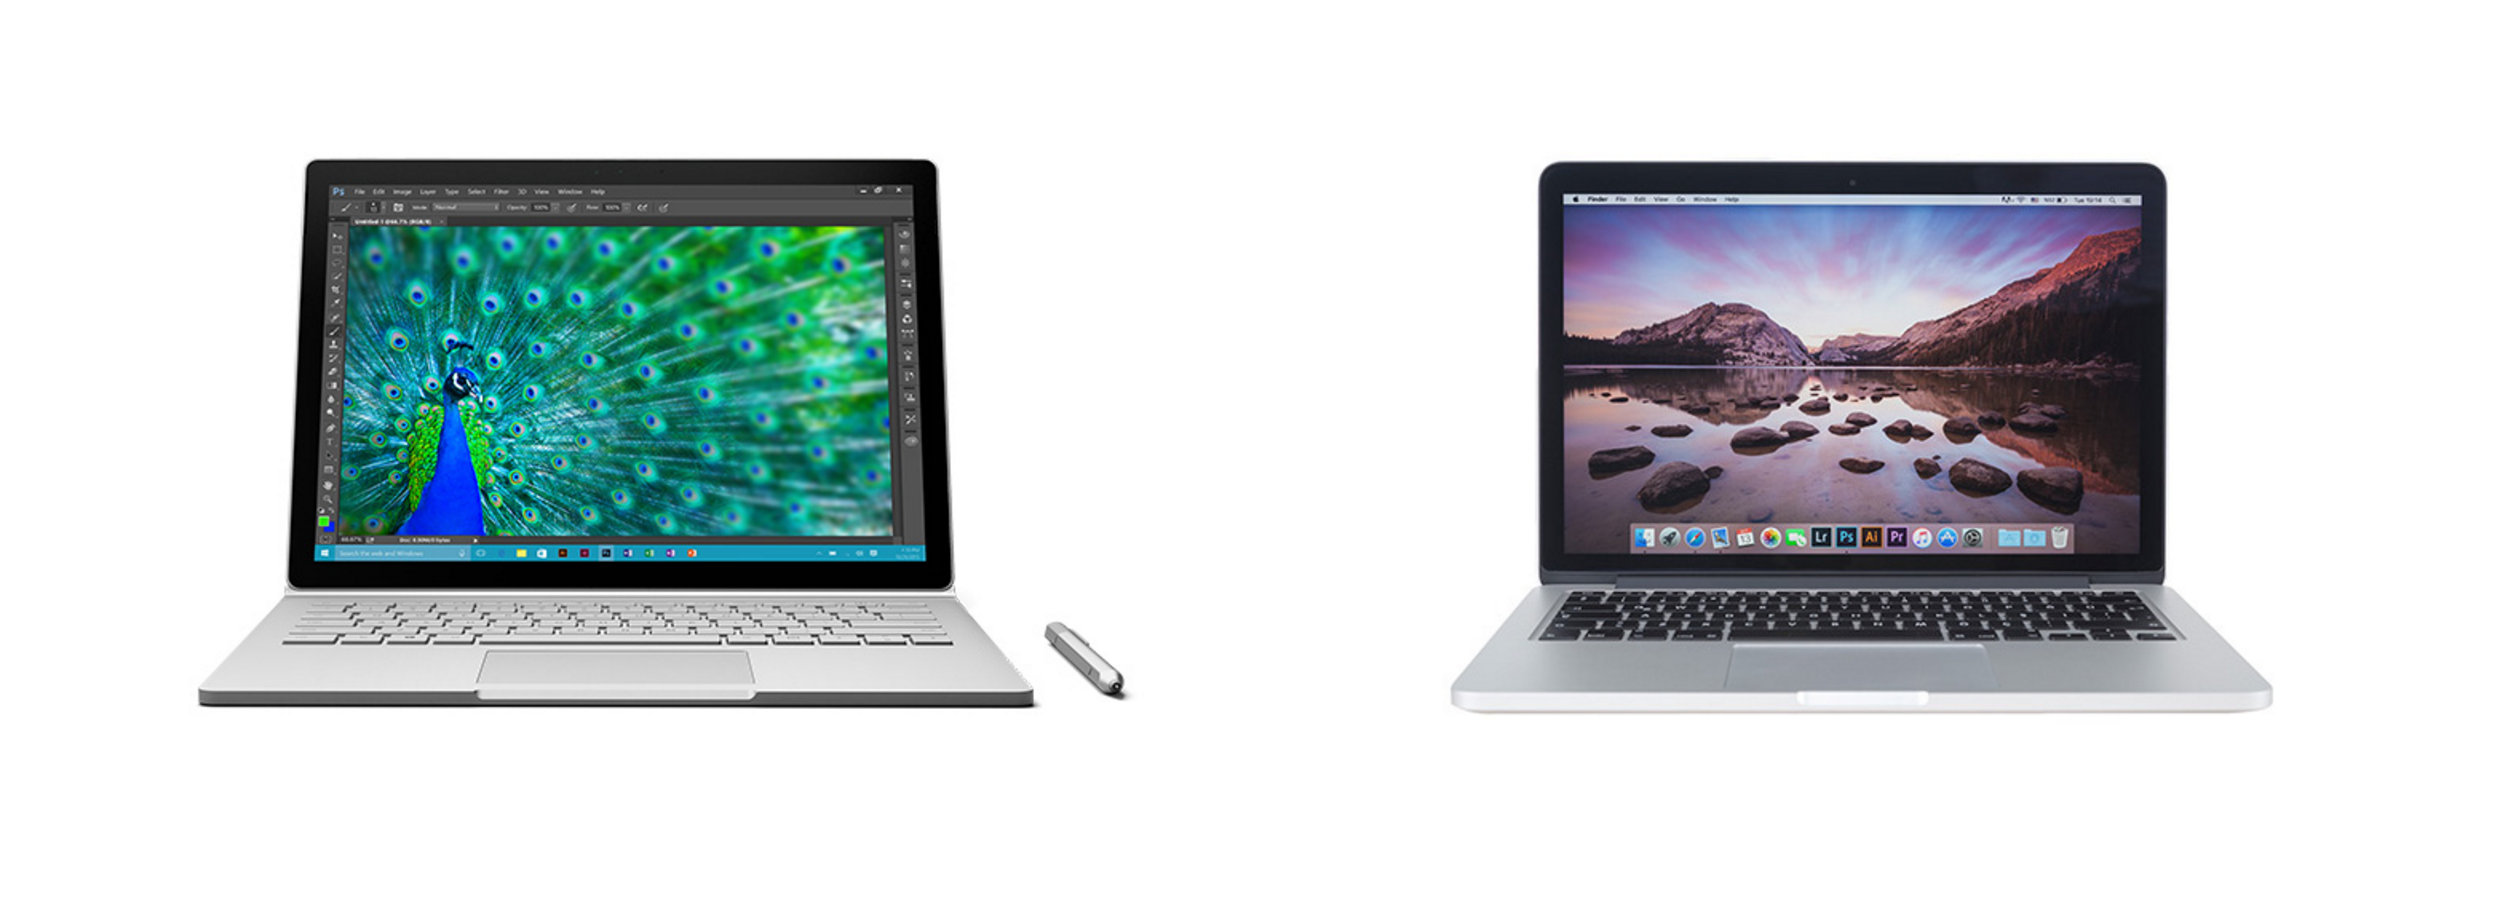 Microsoft Surface Book versus Apple MacBook Pro: the fundamental choice comes down to one question.